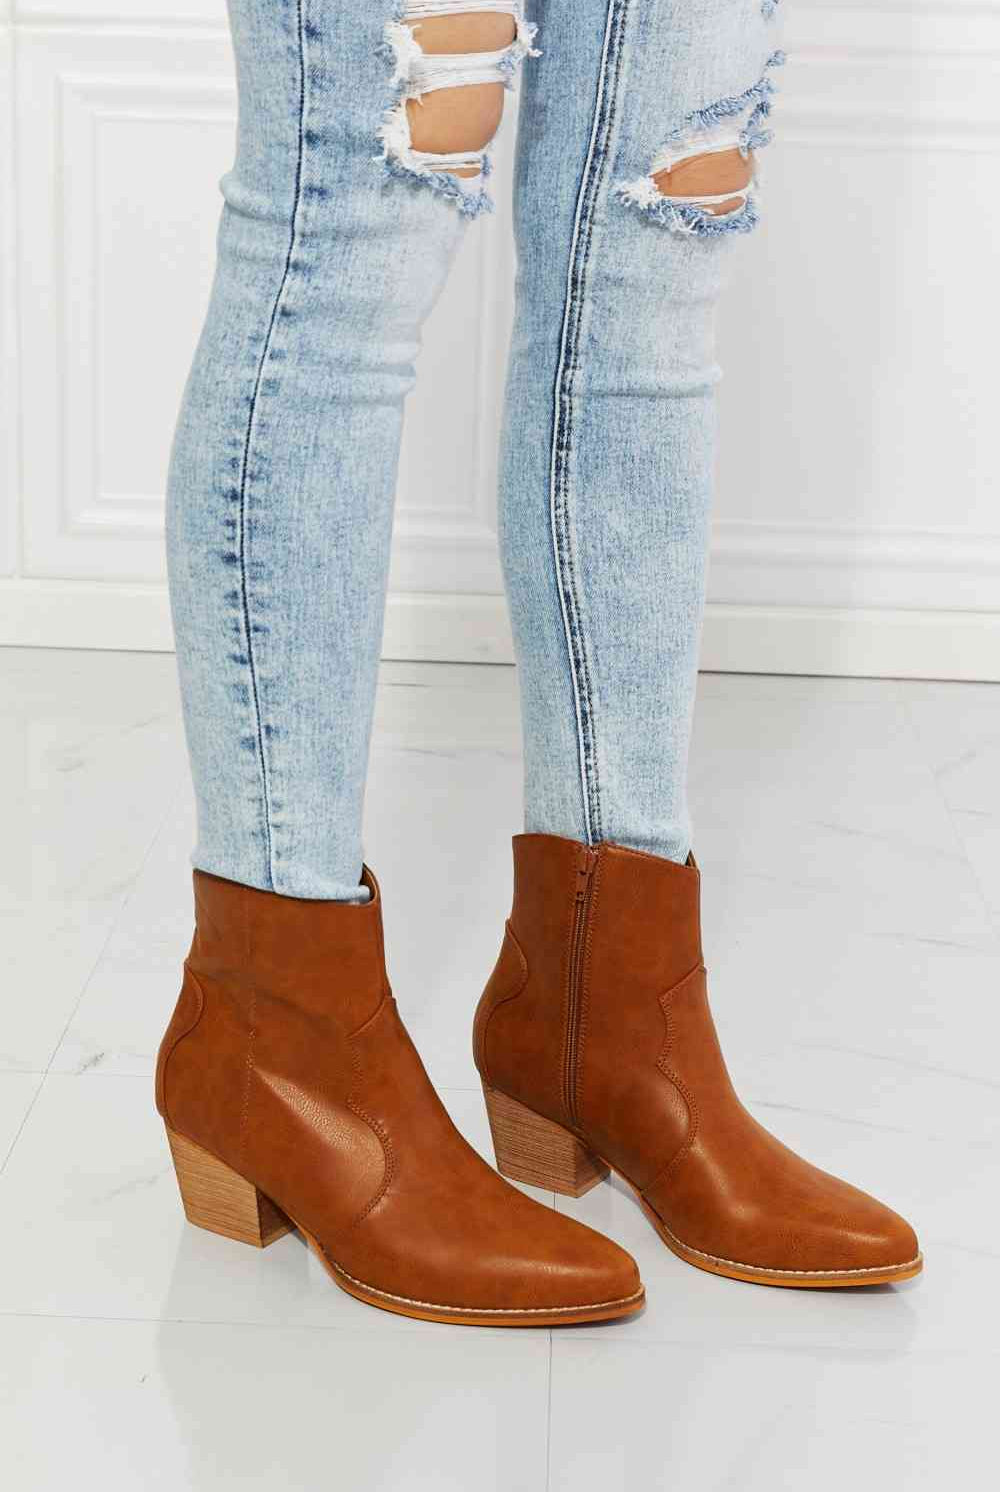 Light Gray MMShoes Watertower Town Faux Leather Western Ankle Boots in Ochre Shoes